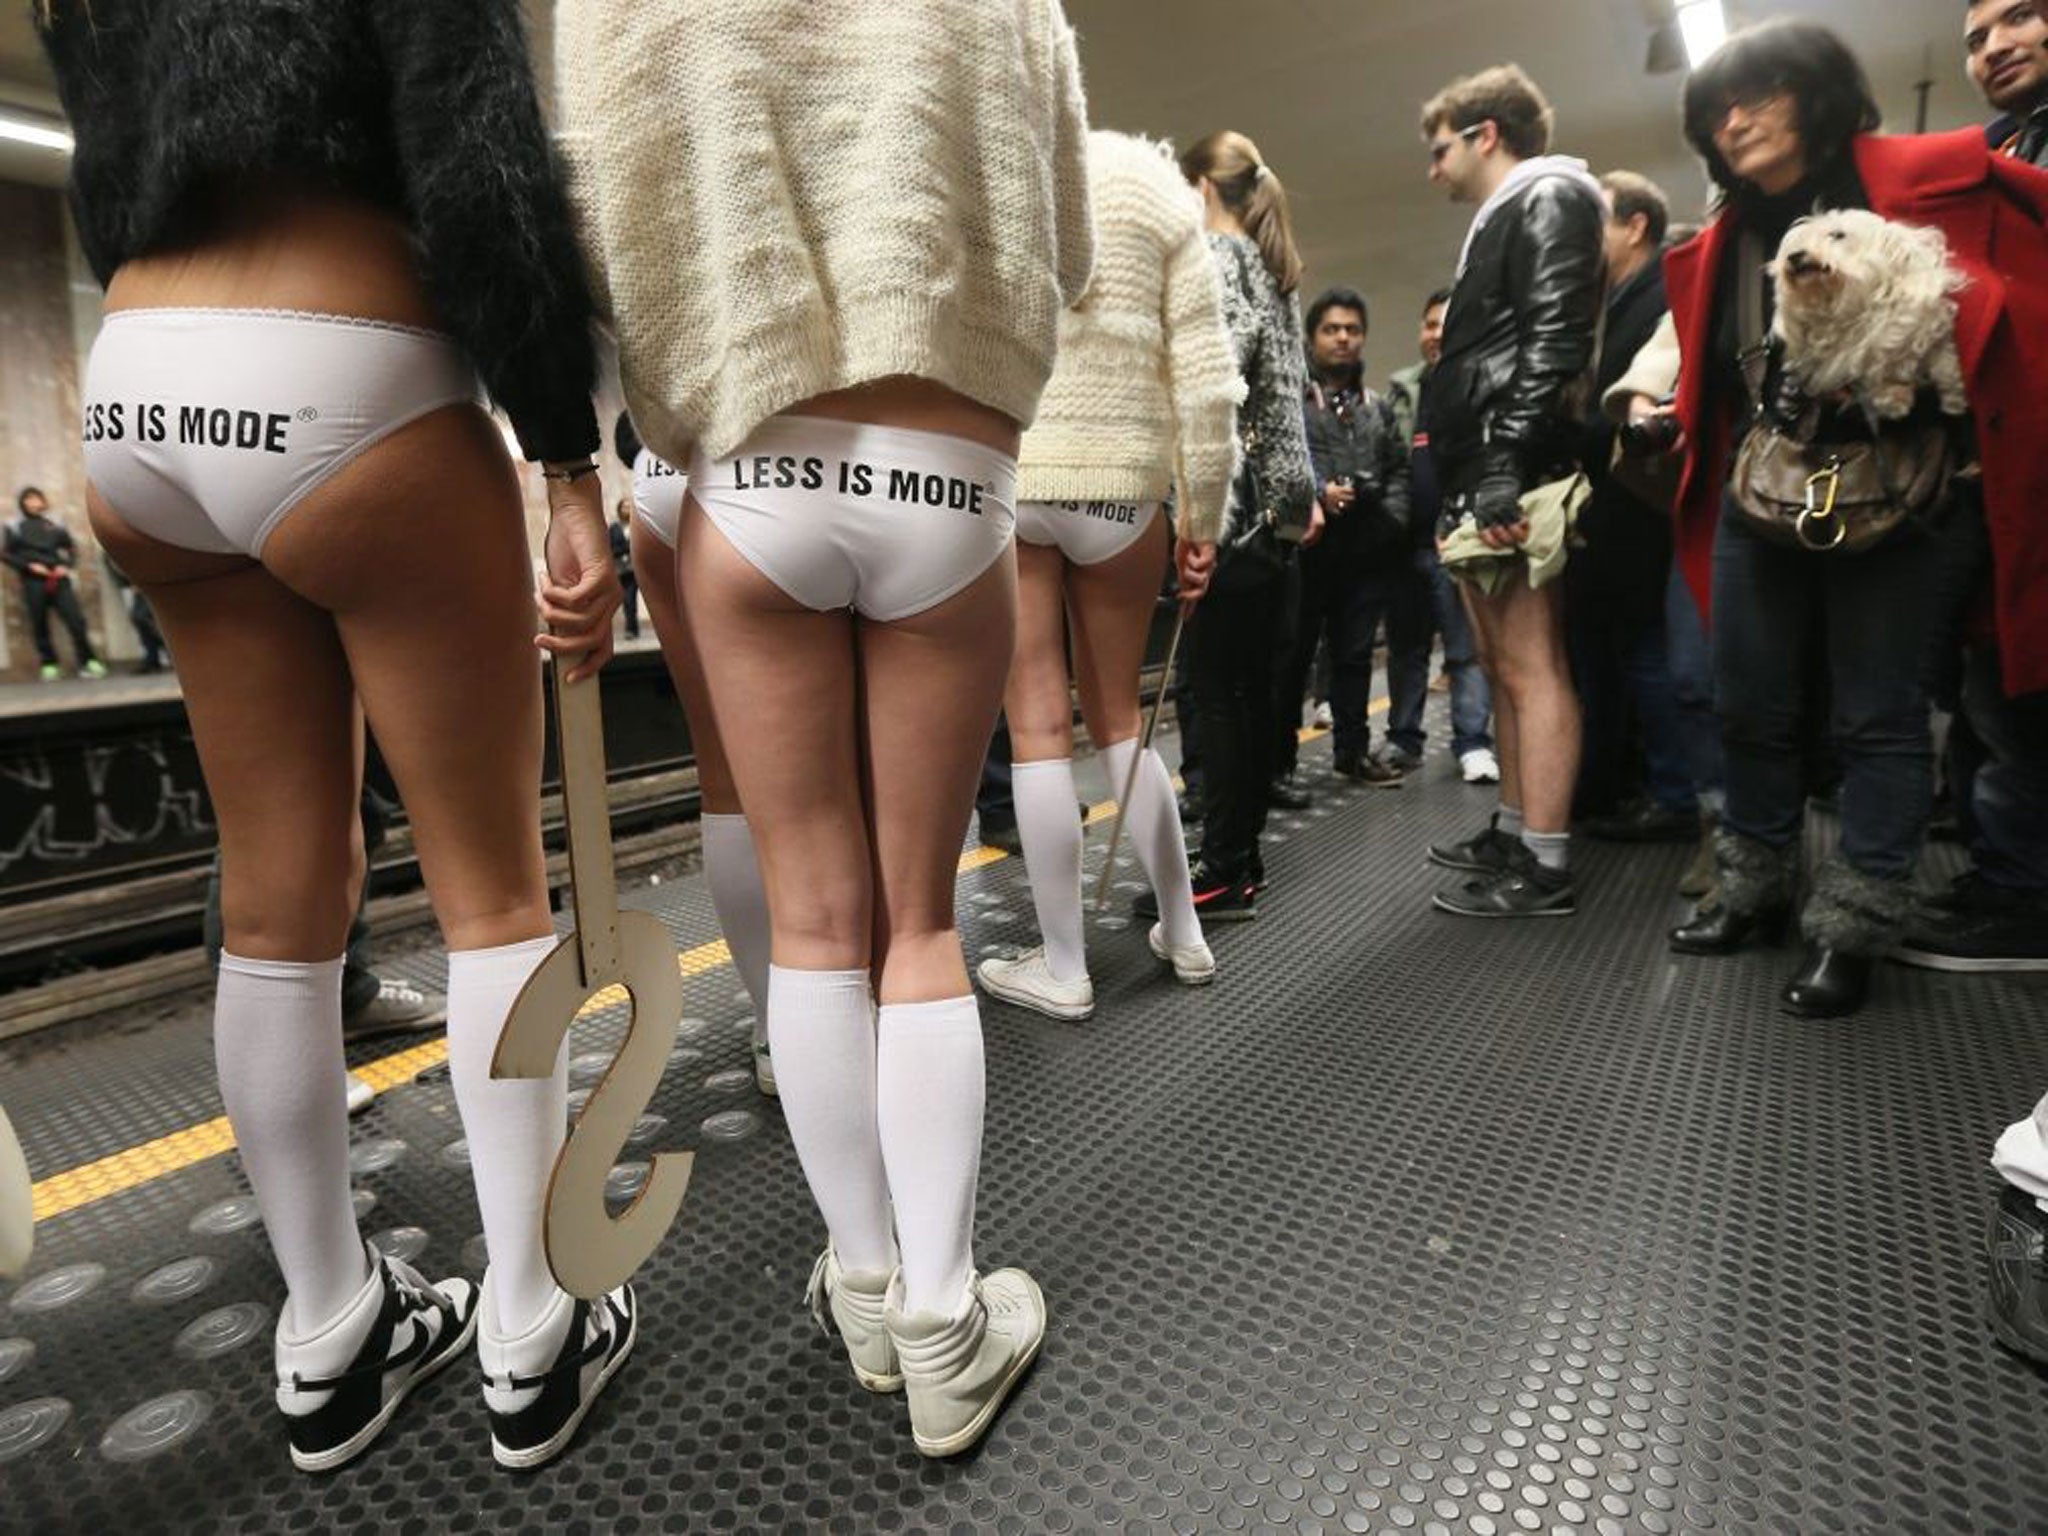 No Trousers Tube Ride. | London News Pictures